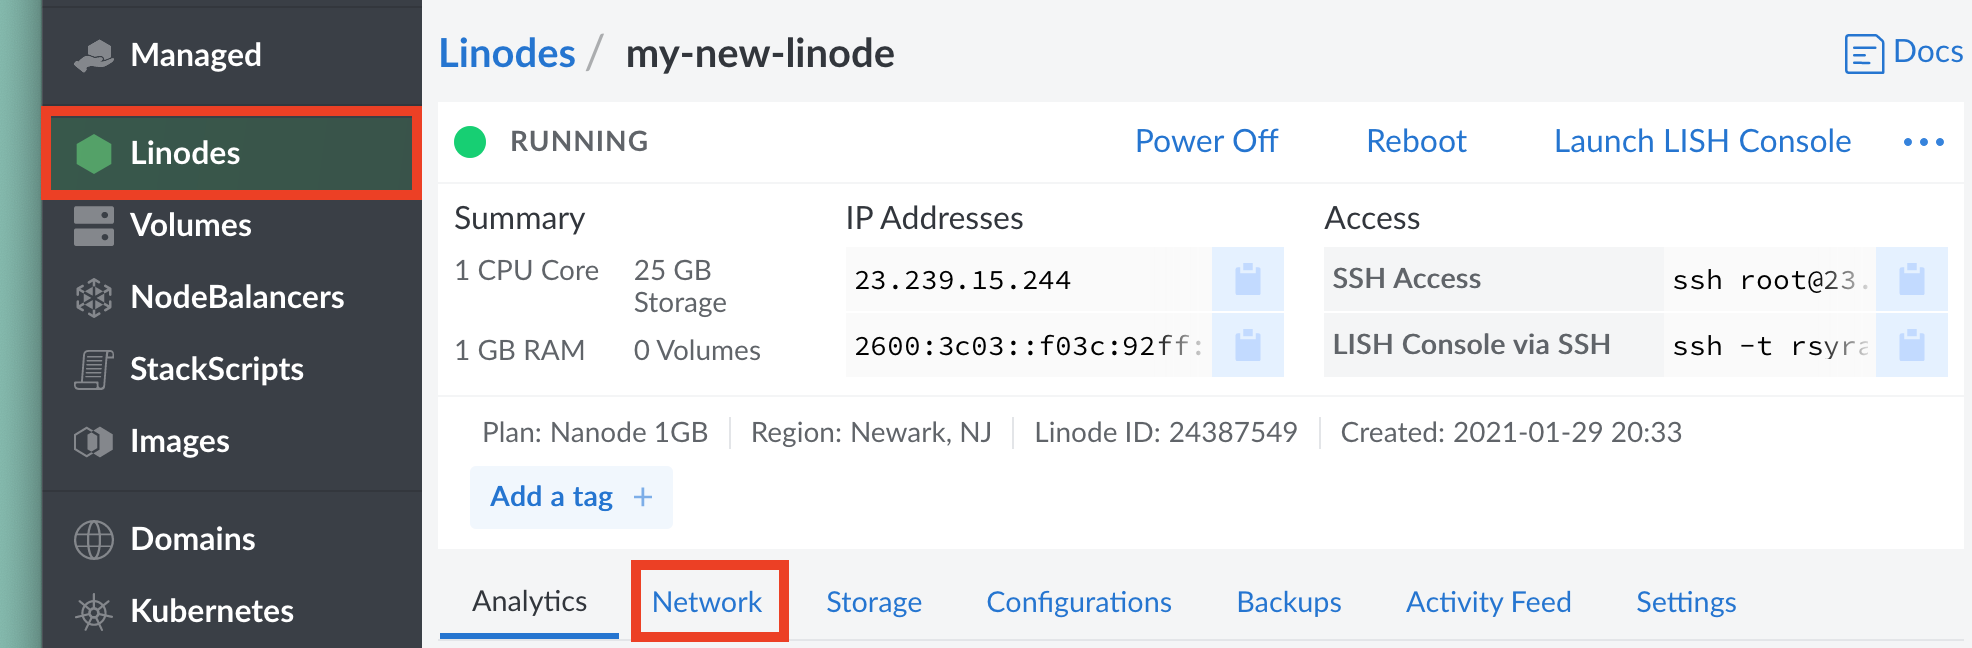 Linode Manager / Networking Tab